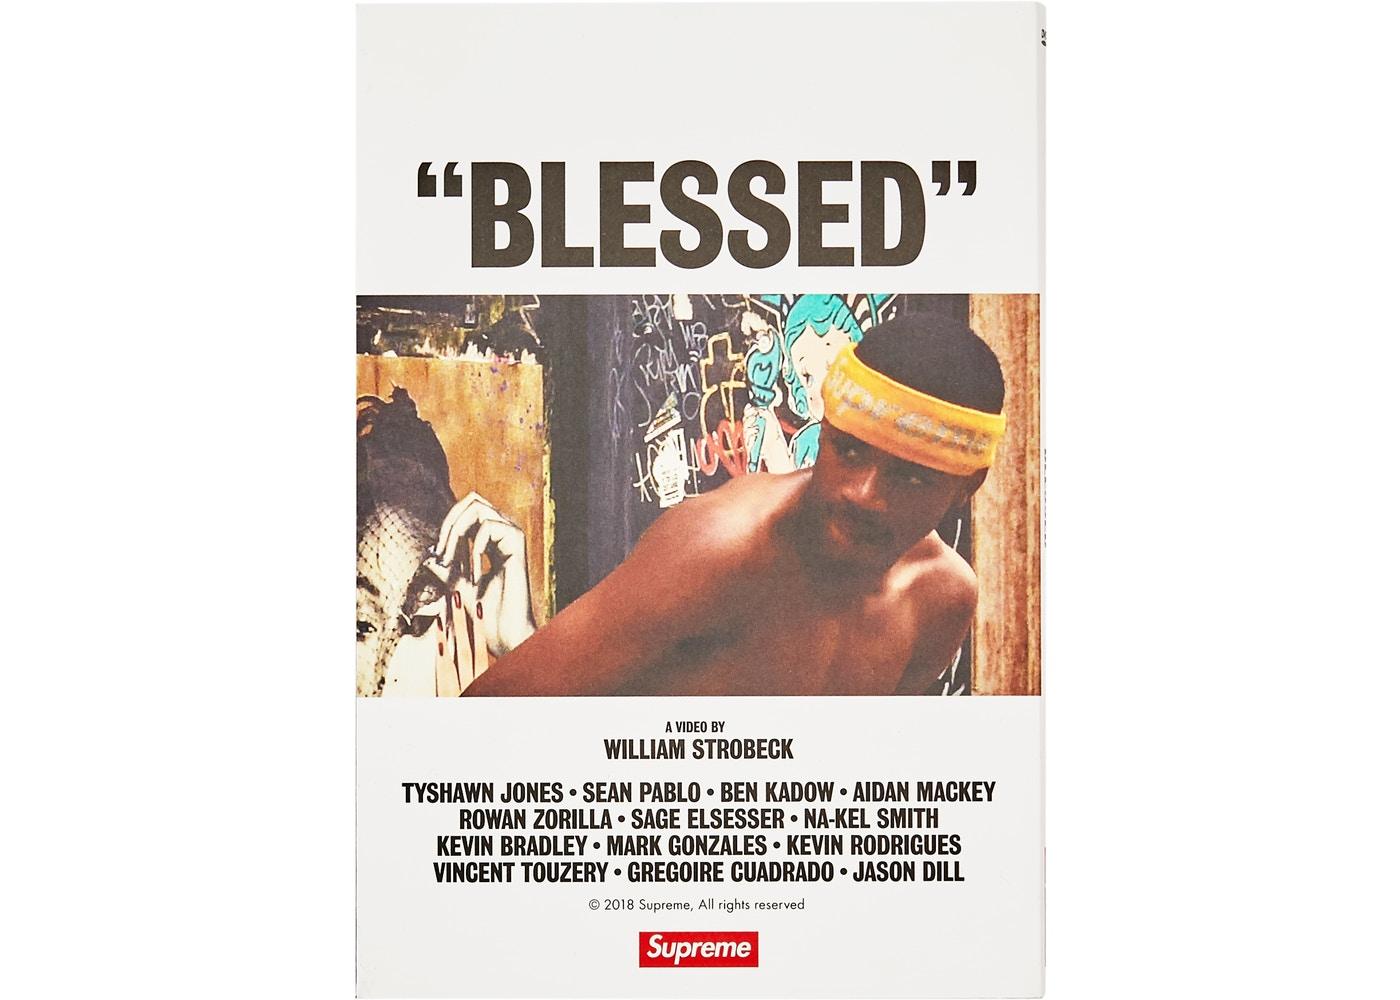 Supreme Blessed DVD and Photo Book - StockX News